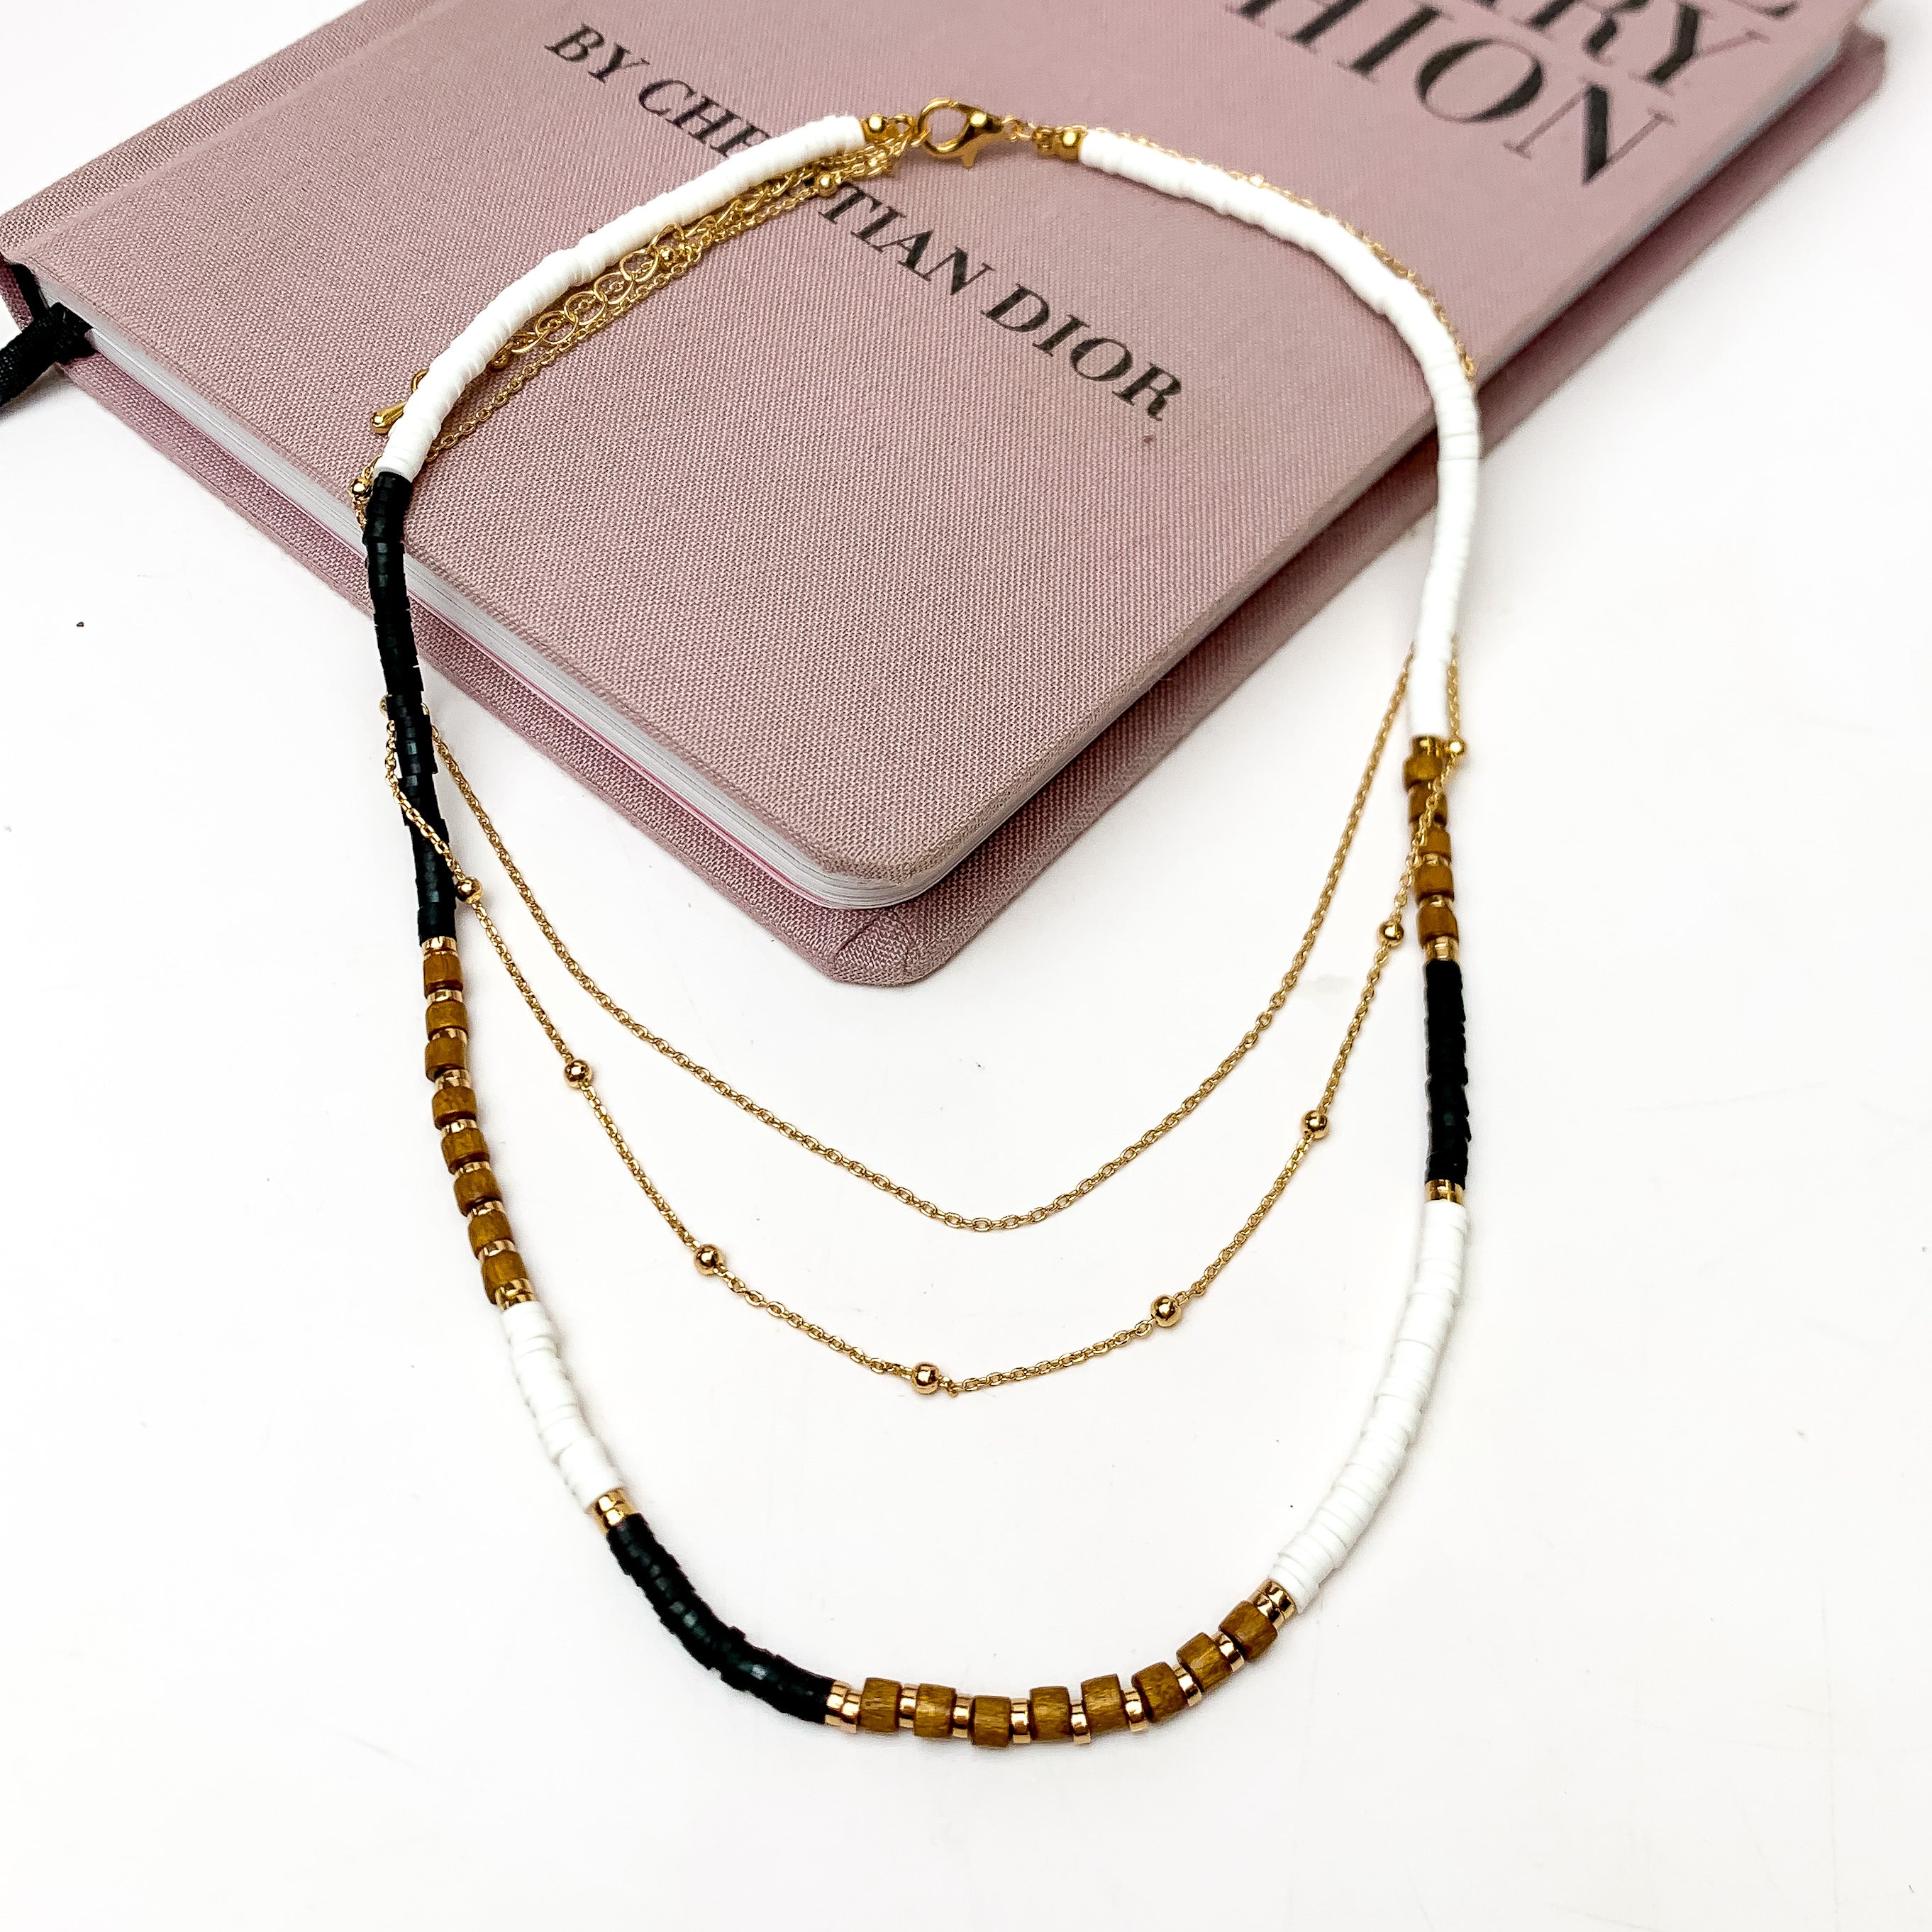 Fall Coastal Multi Strand Gold Tone Necklace in Black. This necklace is pictured on a white background with part of it on a pink book.